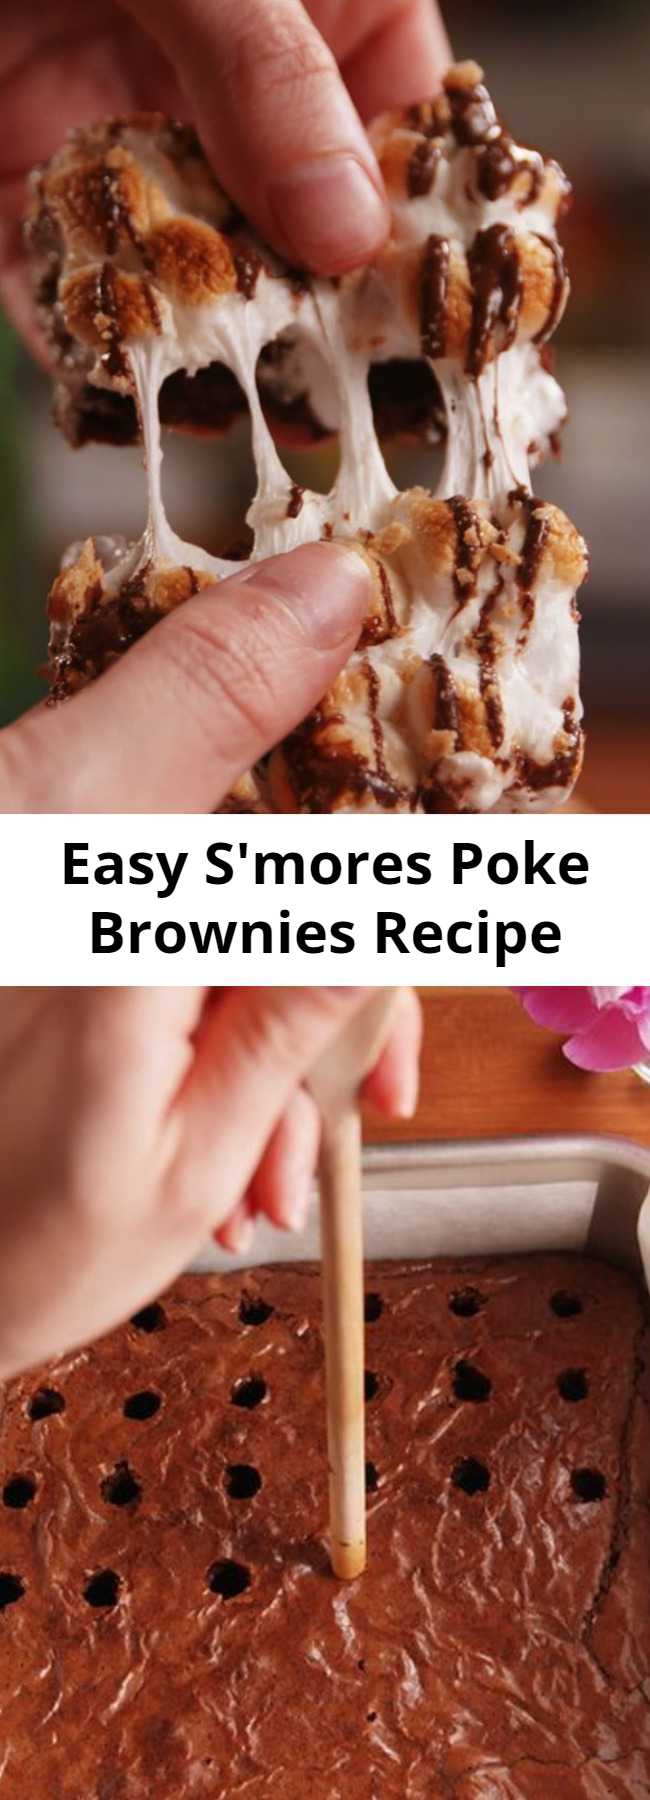 Easy S'mores Poke Brownies Recipe - Just when we thought we had seen every type of s'more possible this one blew us away. Brownies get poked AND topped with marshmallows and then drizzled with chocolate. We are in love.